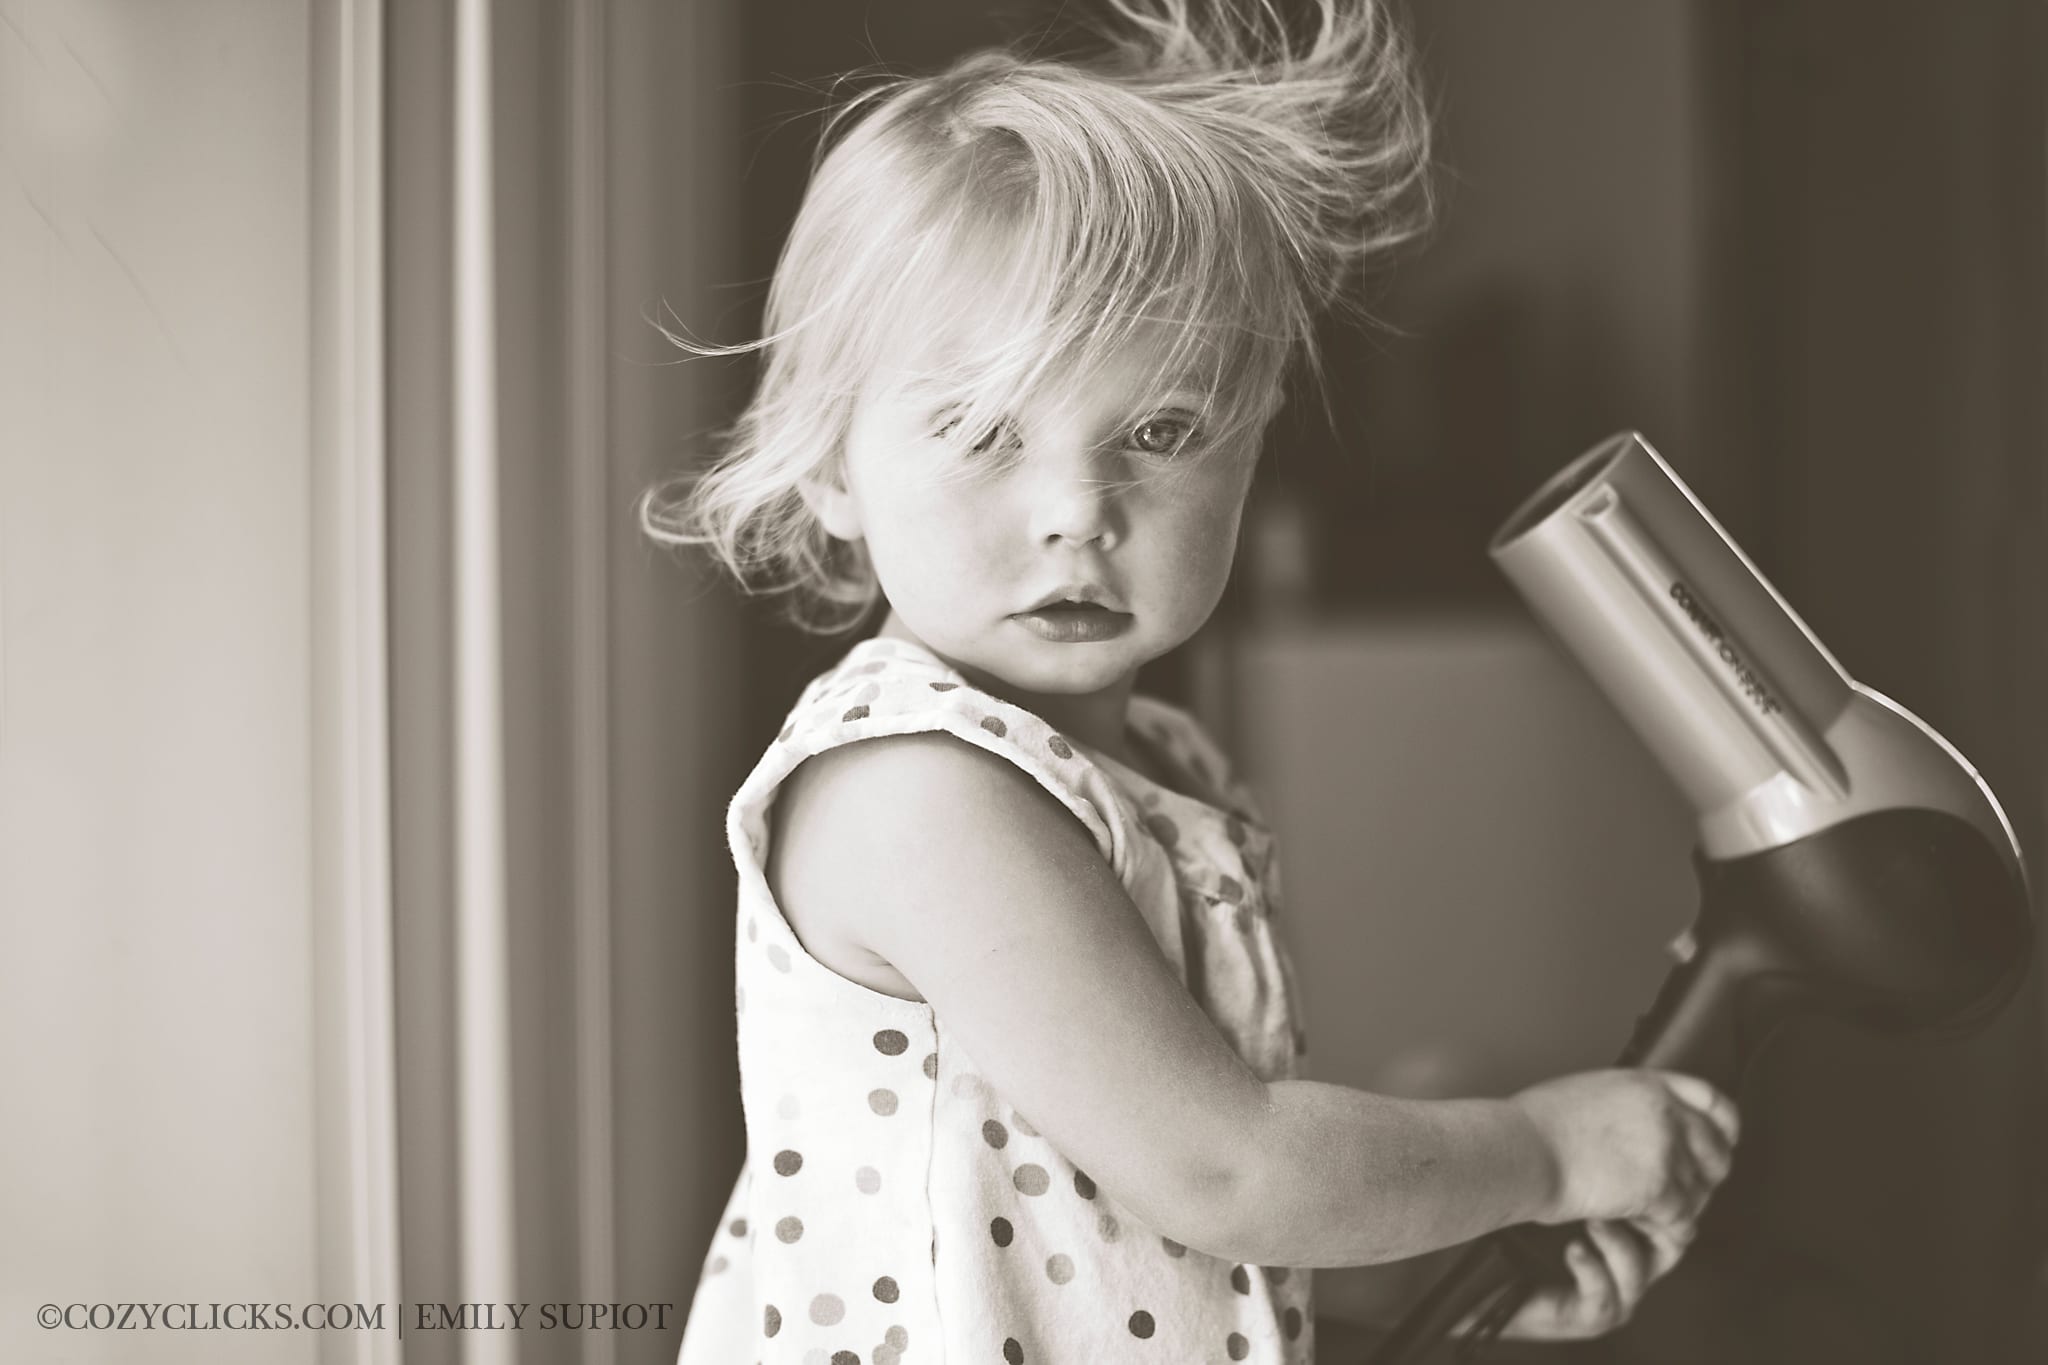 YMCA Ahwatukee Foothills featured artist of the month . Child photography black and white blow dryer photo